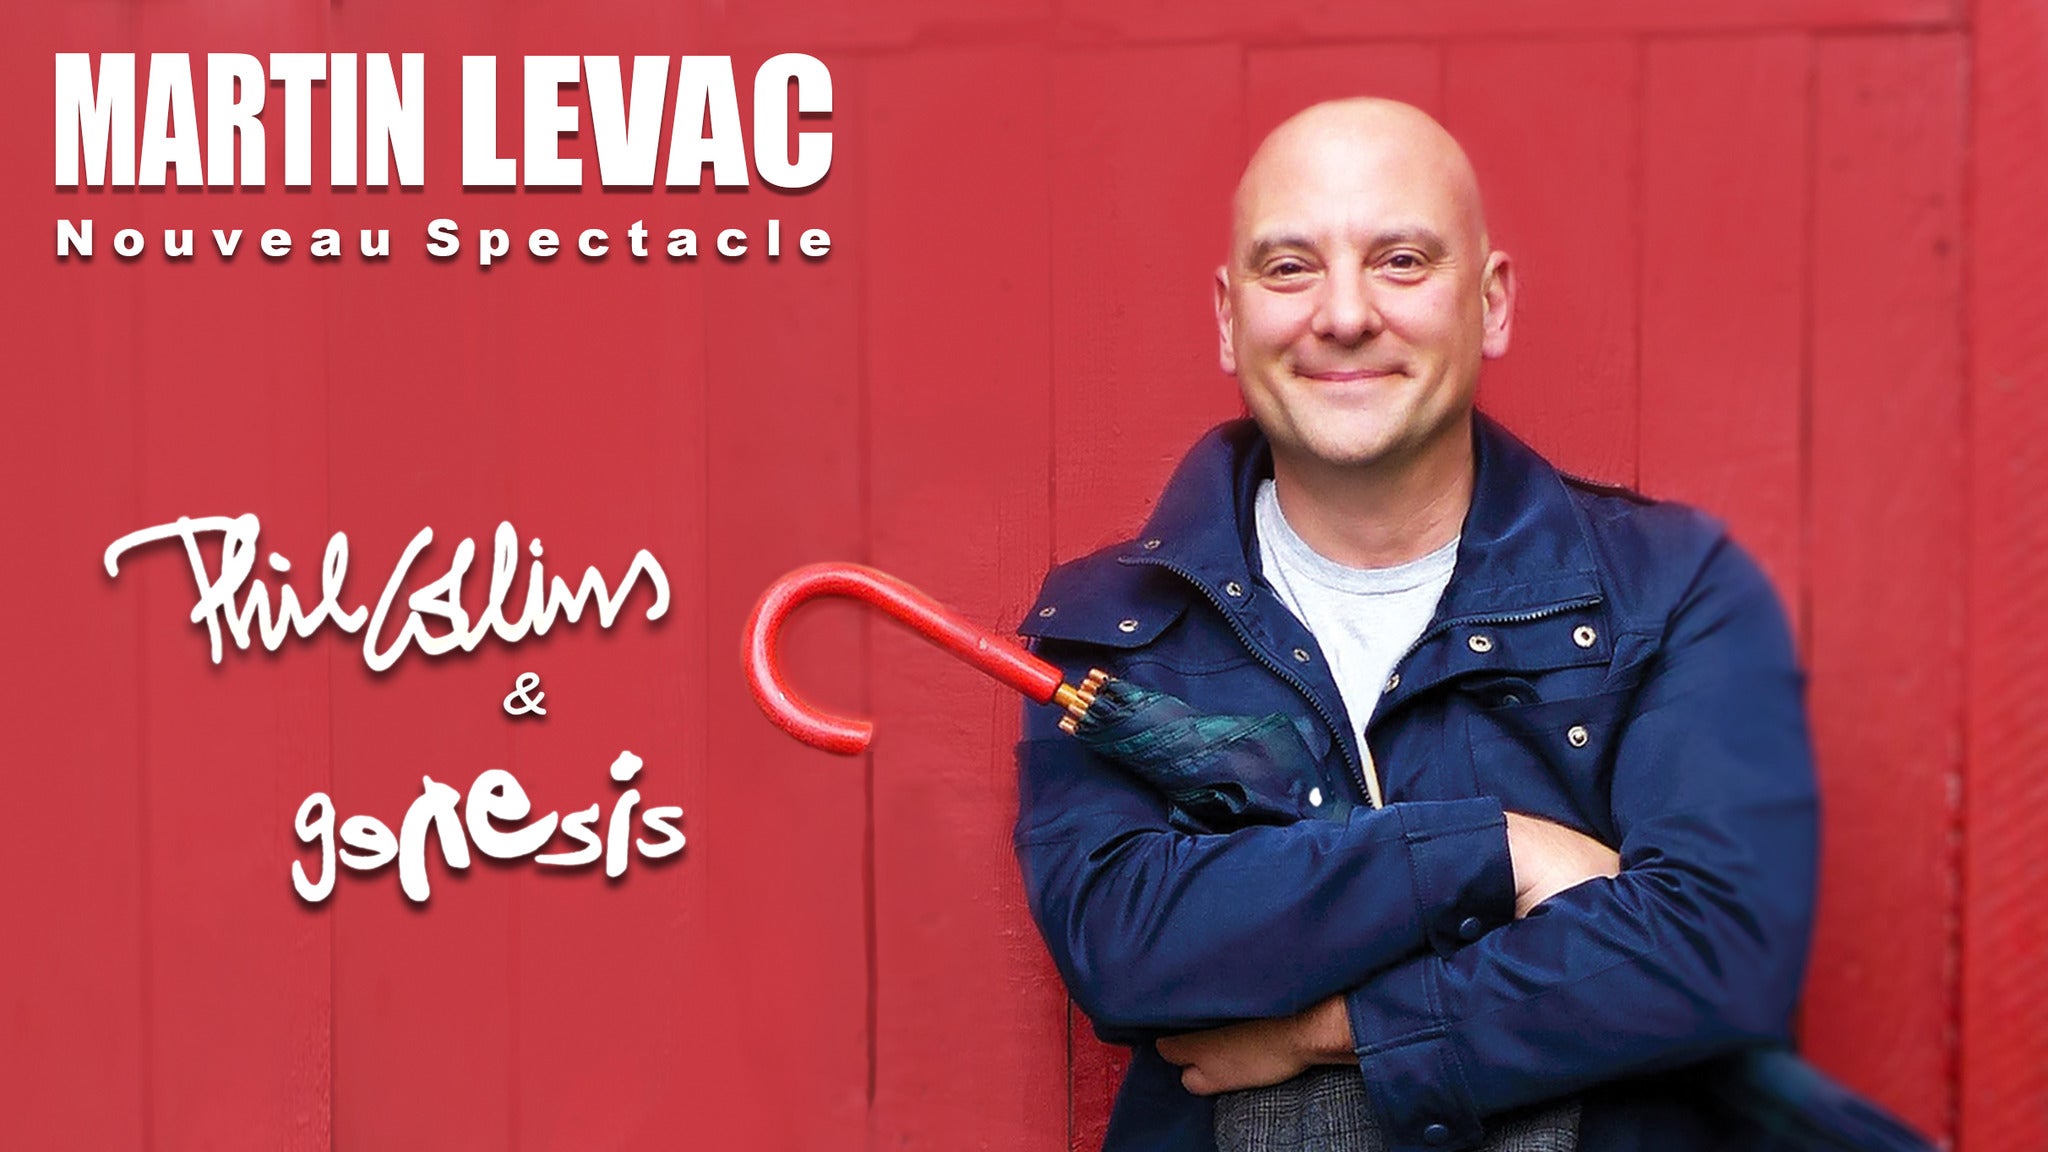 Image used with permission from Ticketmaster | Martin Levac, Nouveau Spectacle tickets